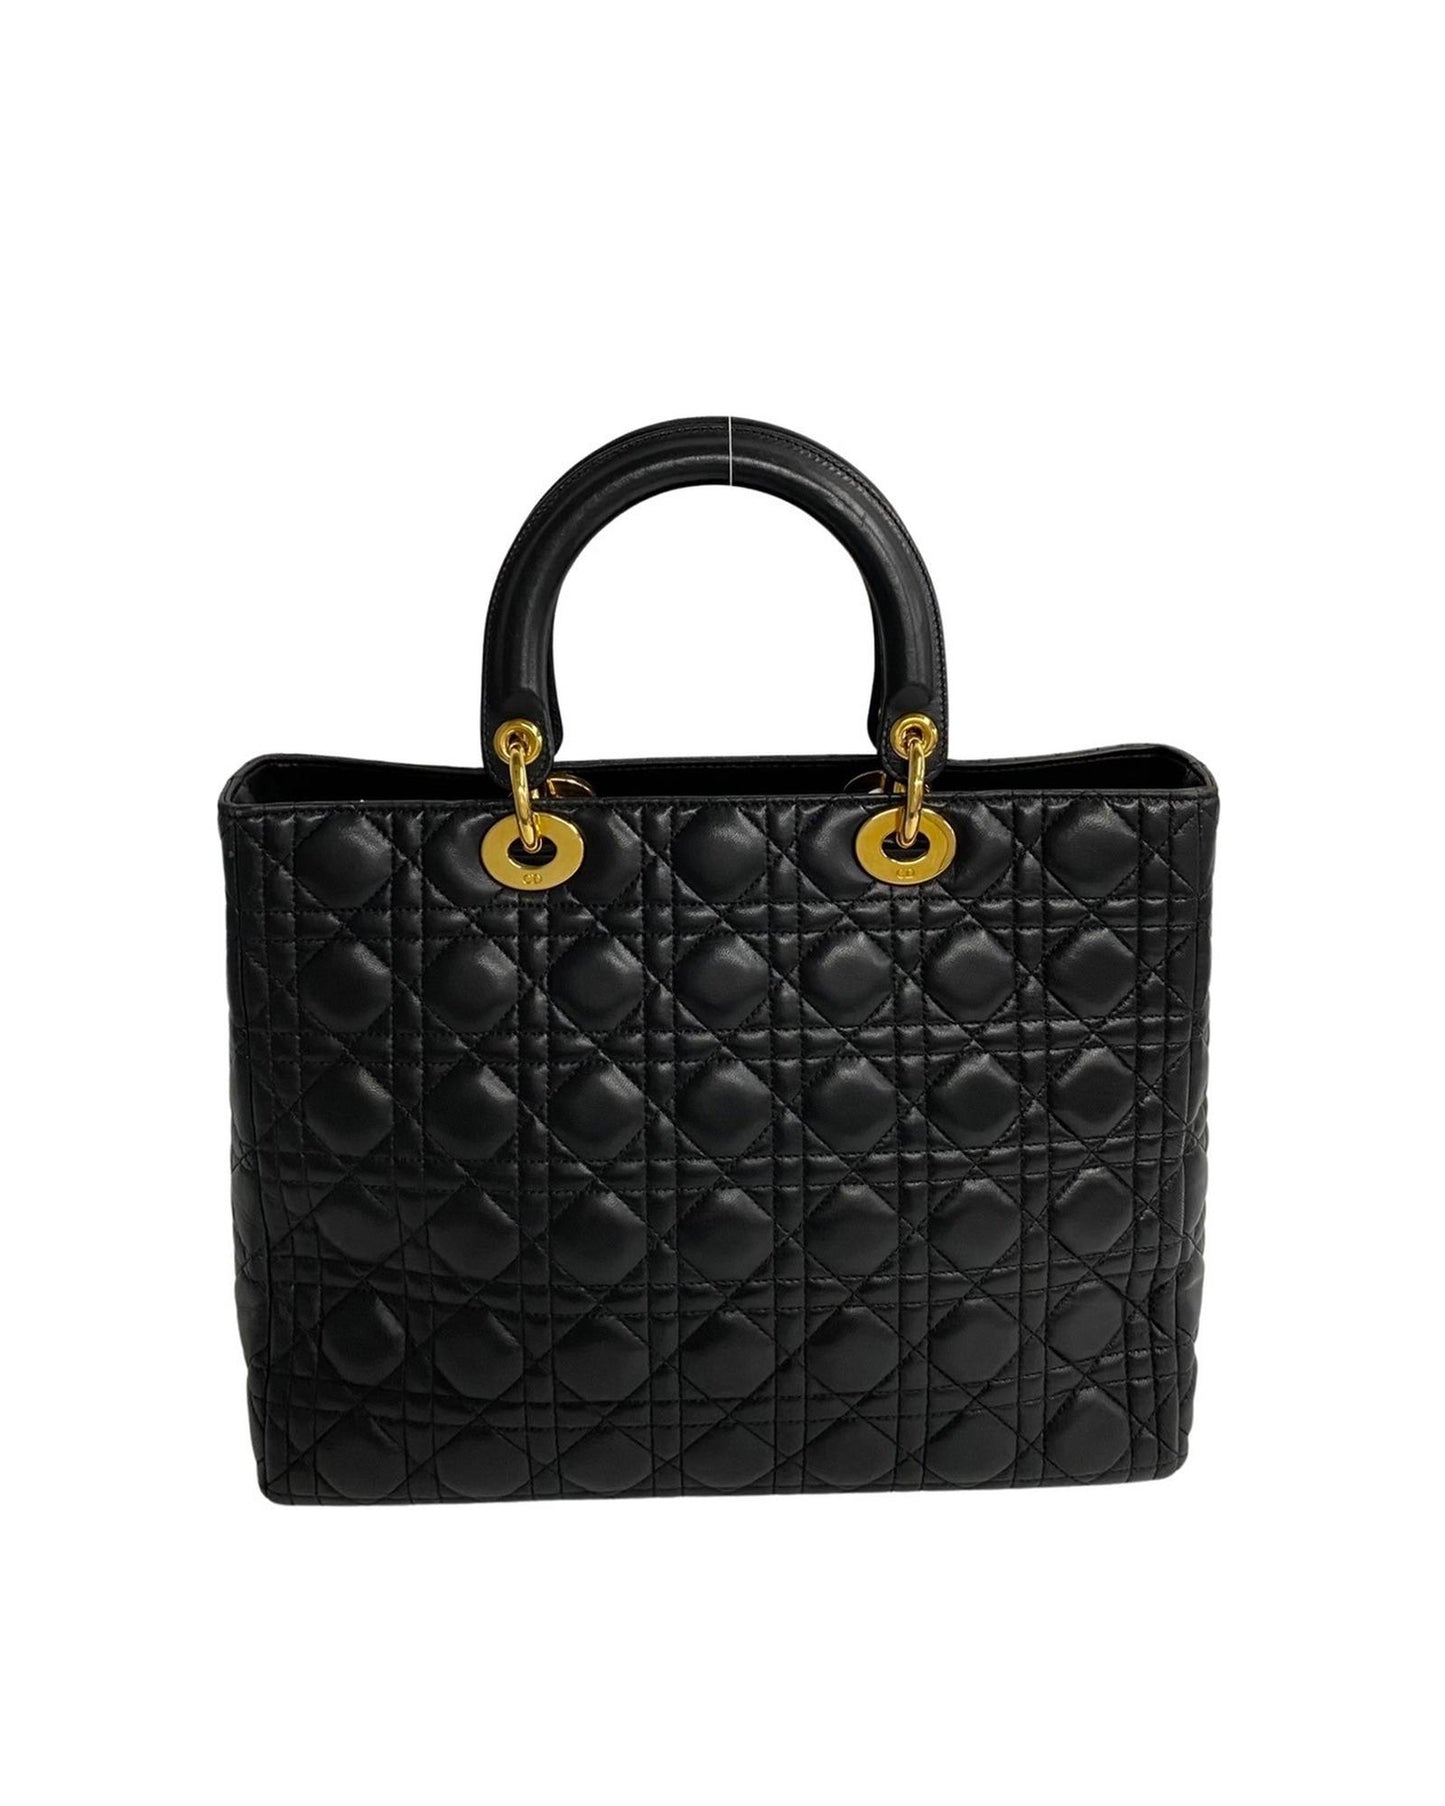 Dior Women's Large Leather Cannage Lady Bag in Black